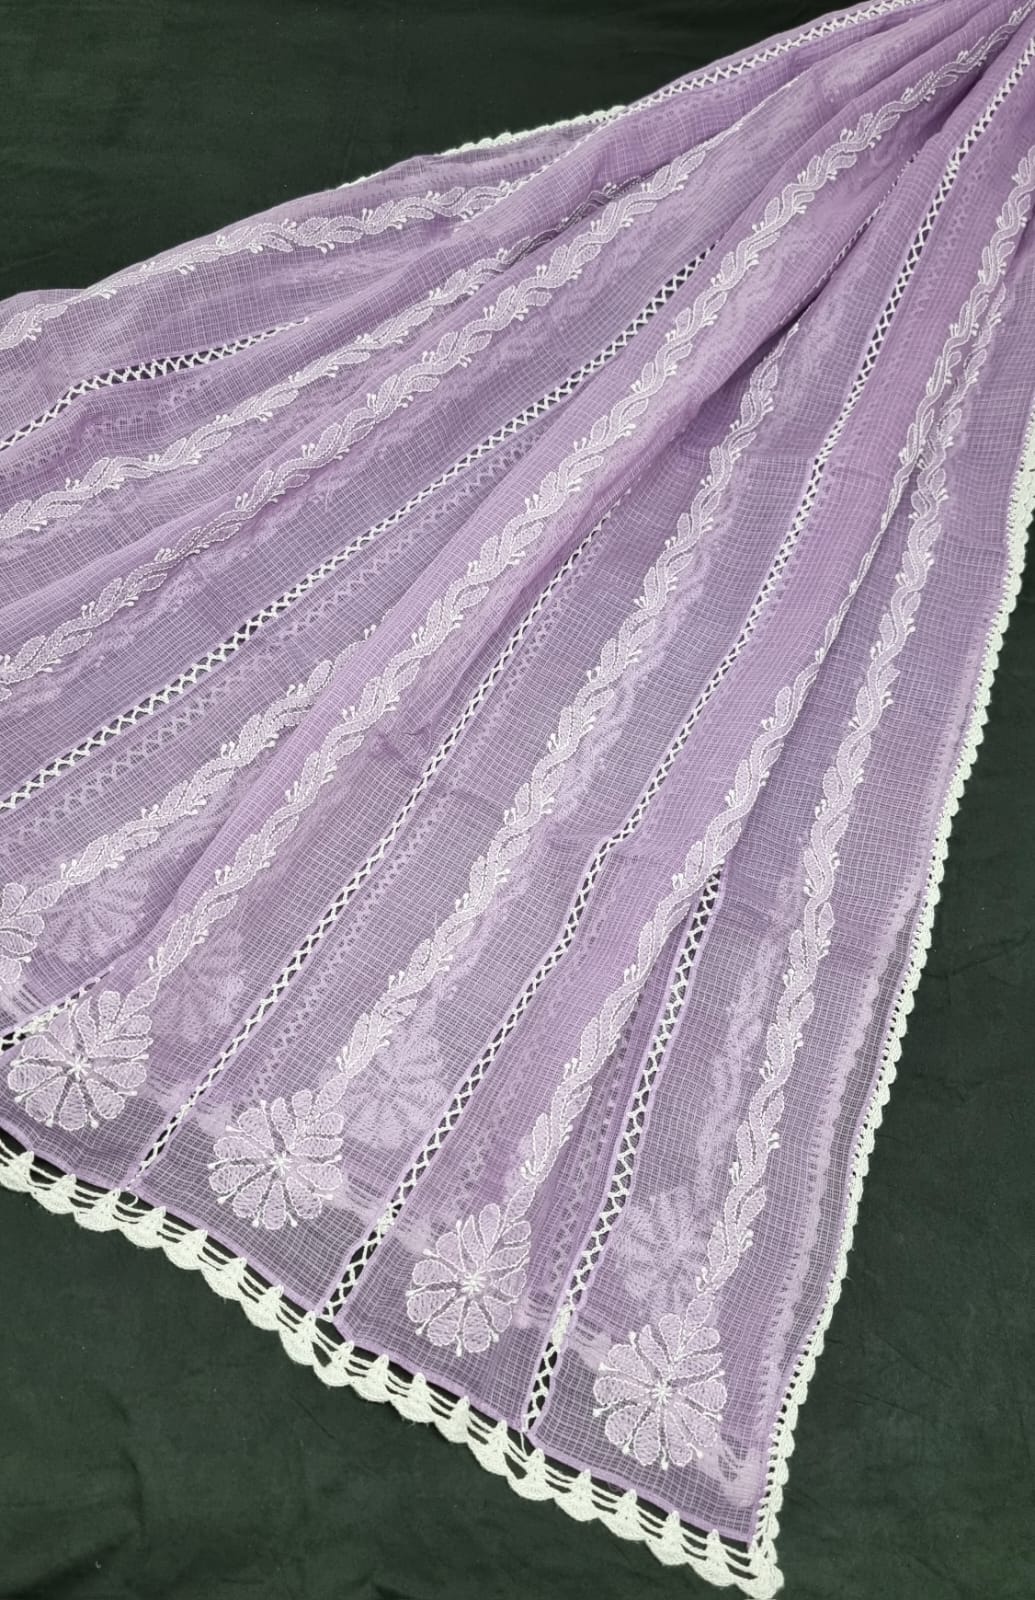 Handcrafted Kota Cotton Dupatta with heavy Chikankari embroidery & crochet borders - Dyeable